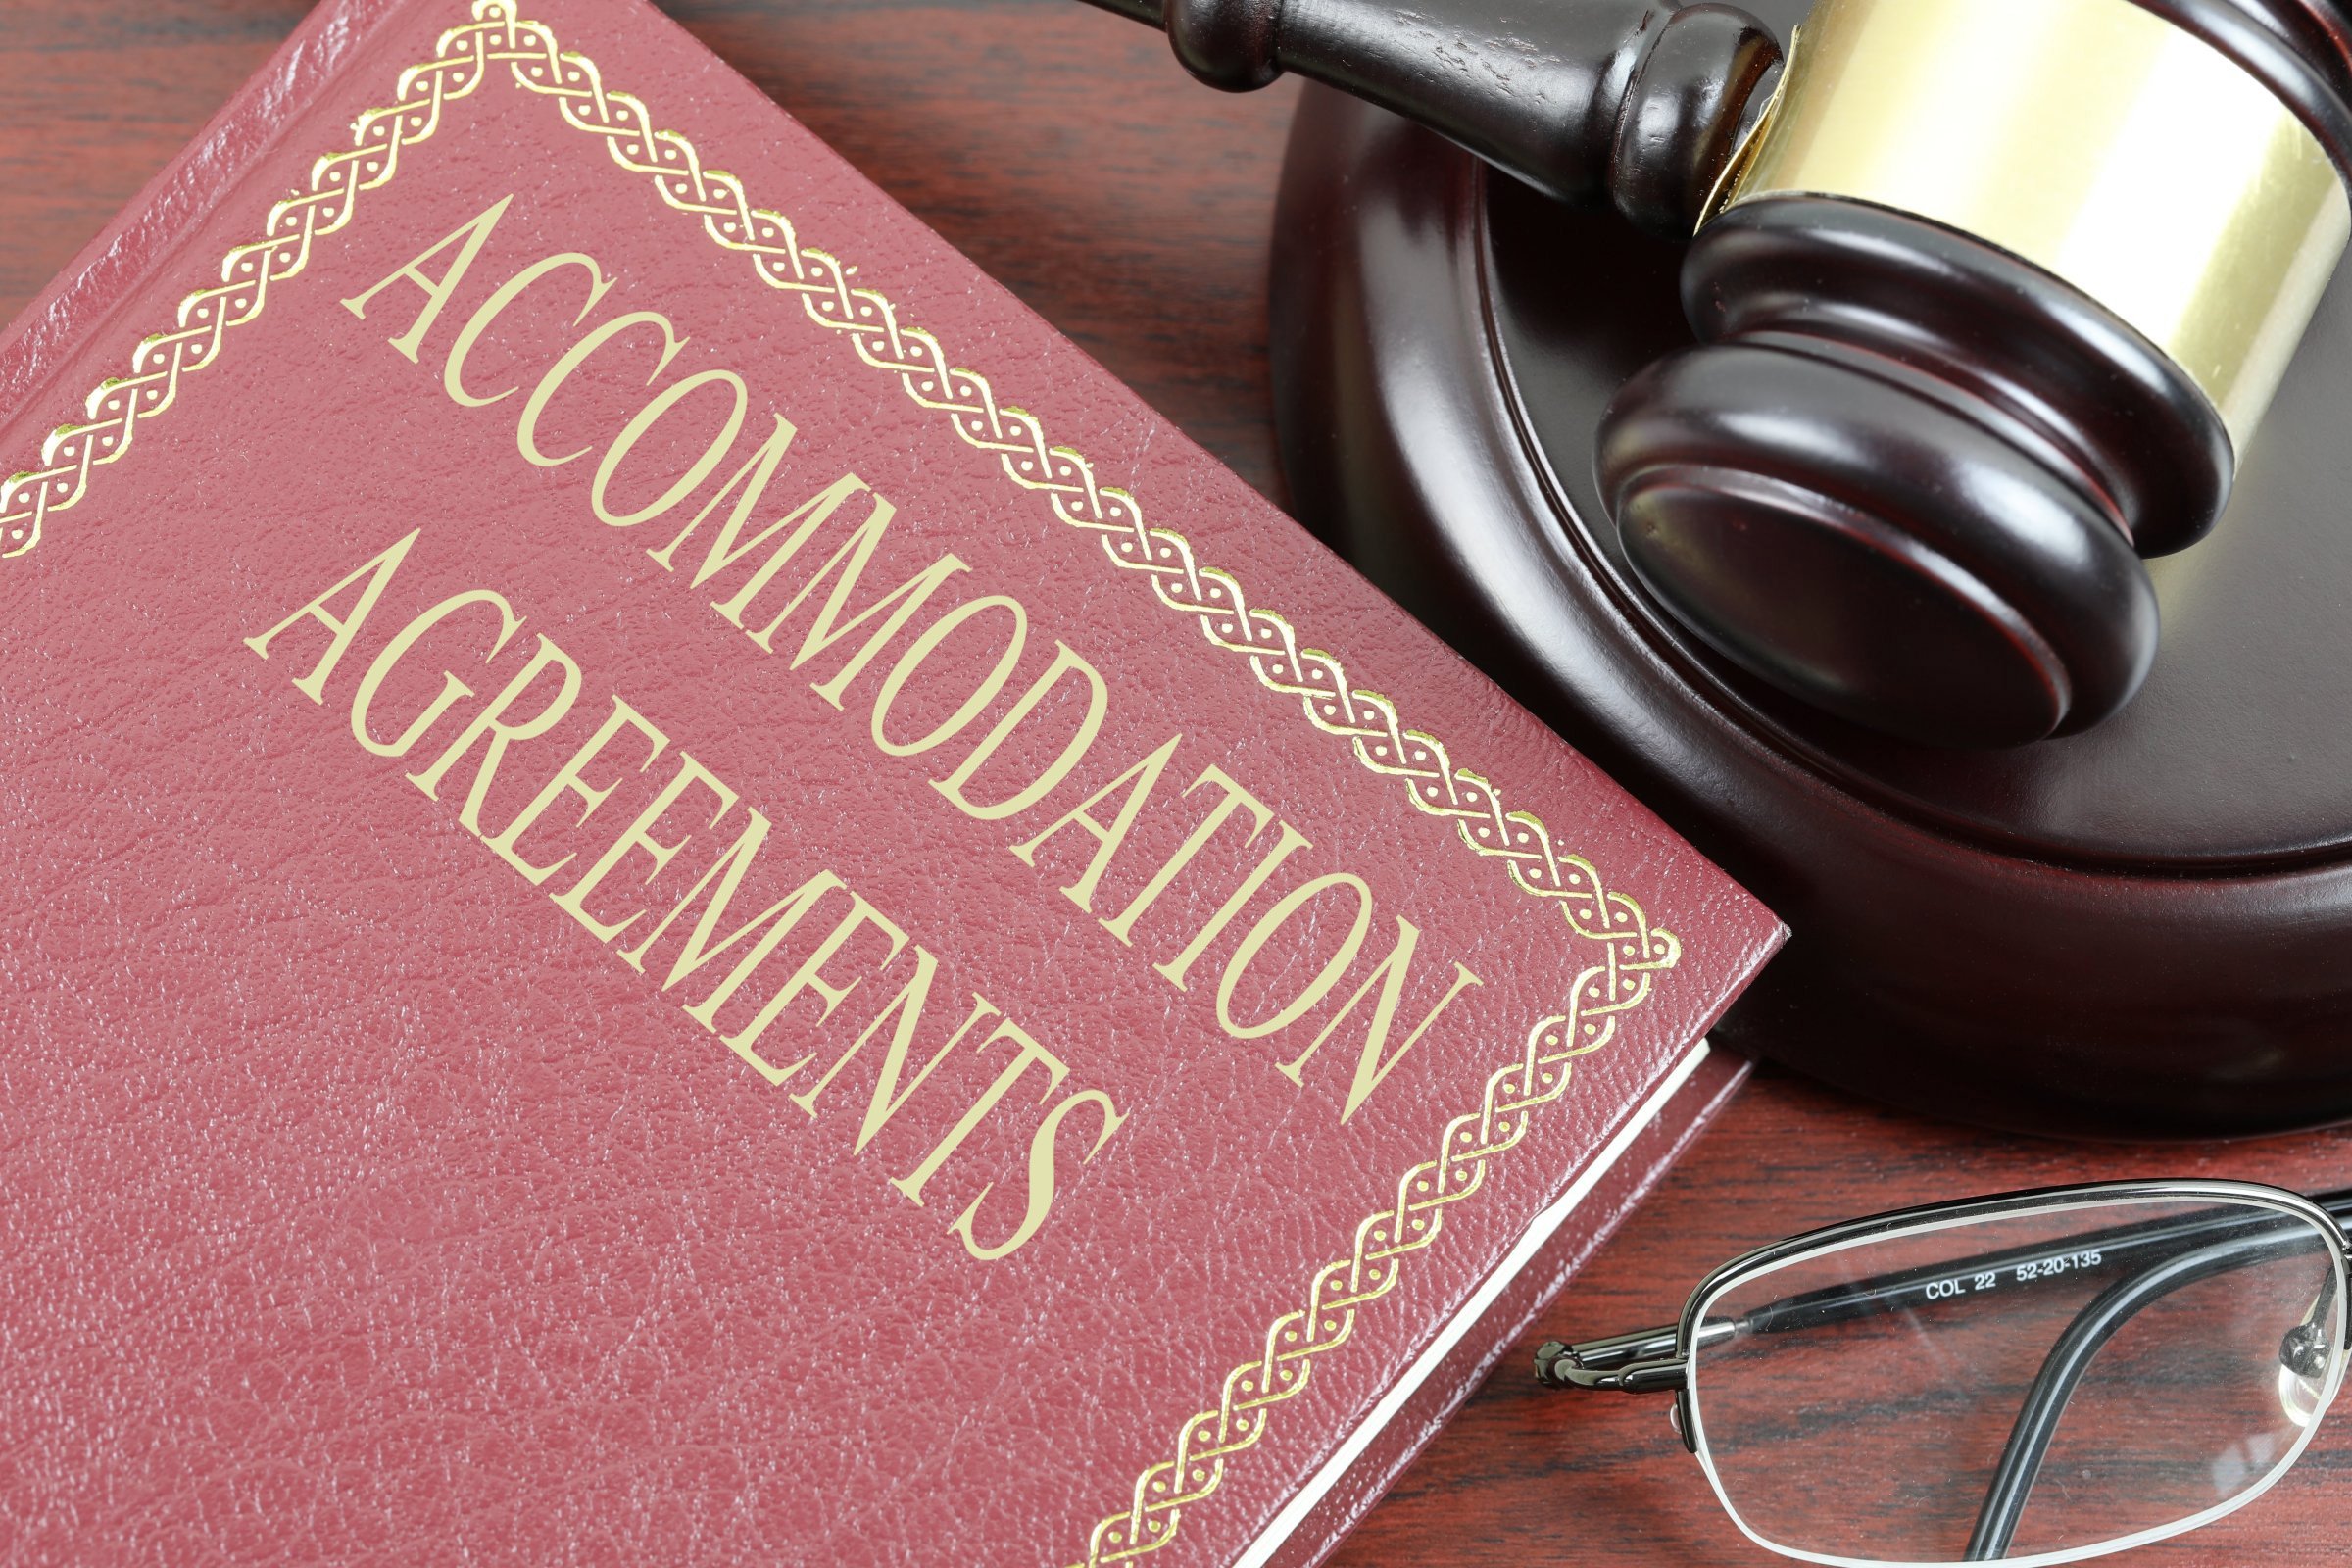 accommodation agreements